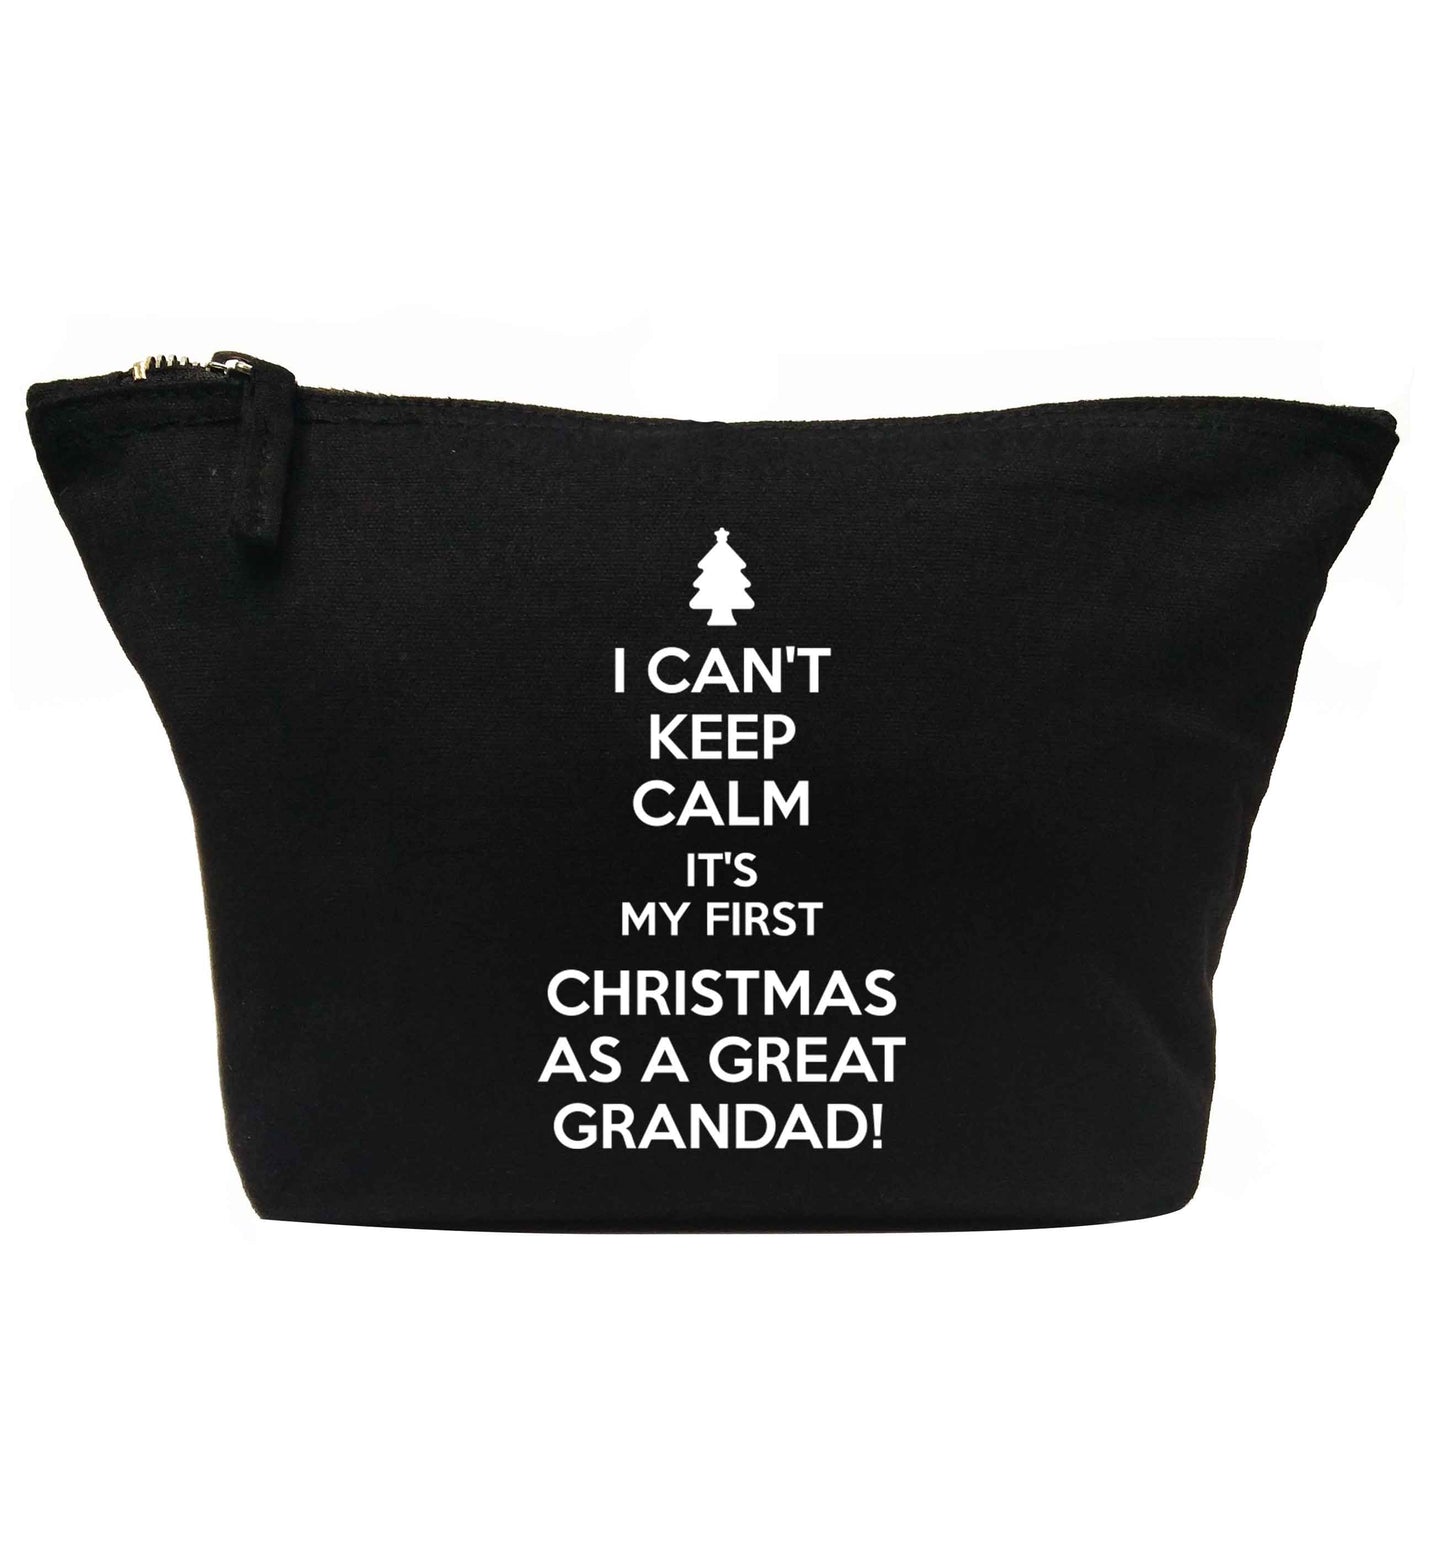 I can't keep calm it's my first Christmas as a great grandad! | makeup / wash bag